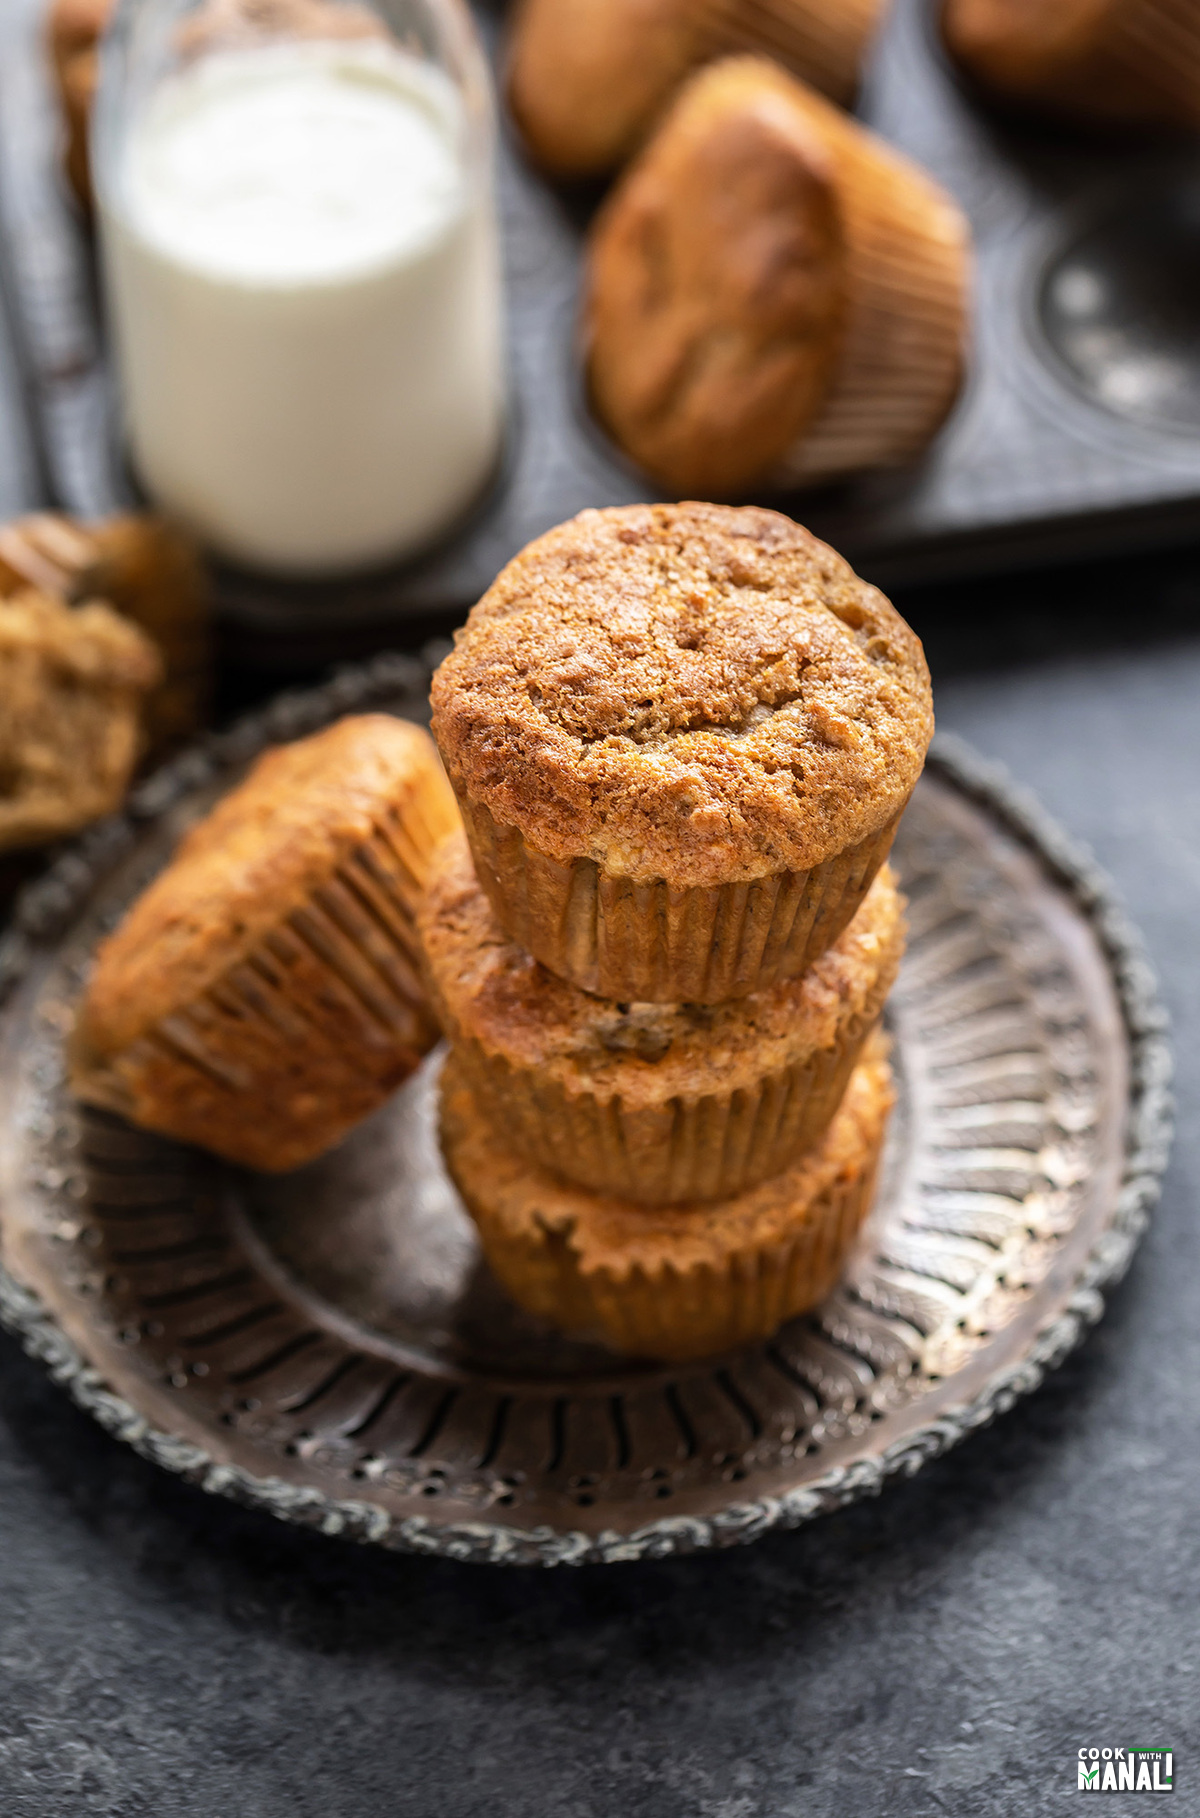 The 10 Unhealthiest Store-Bought Muffins